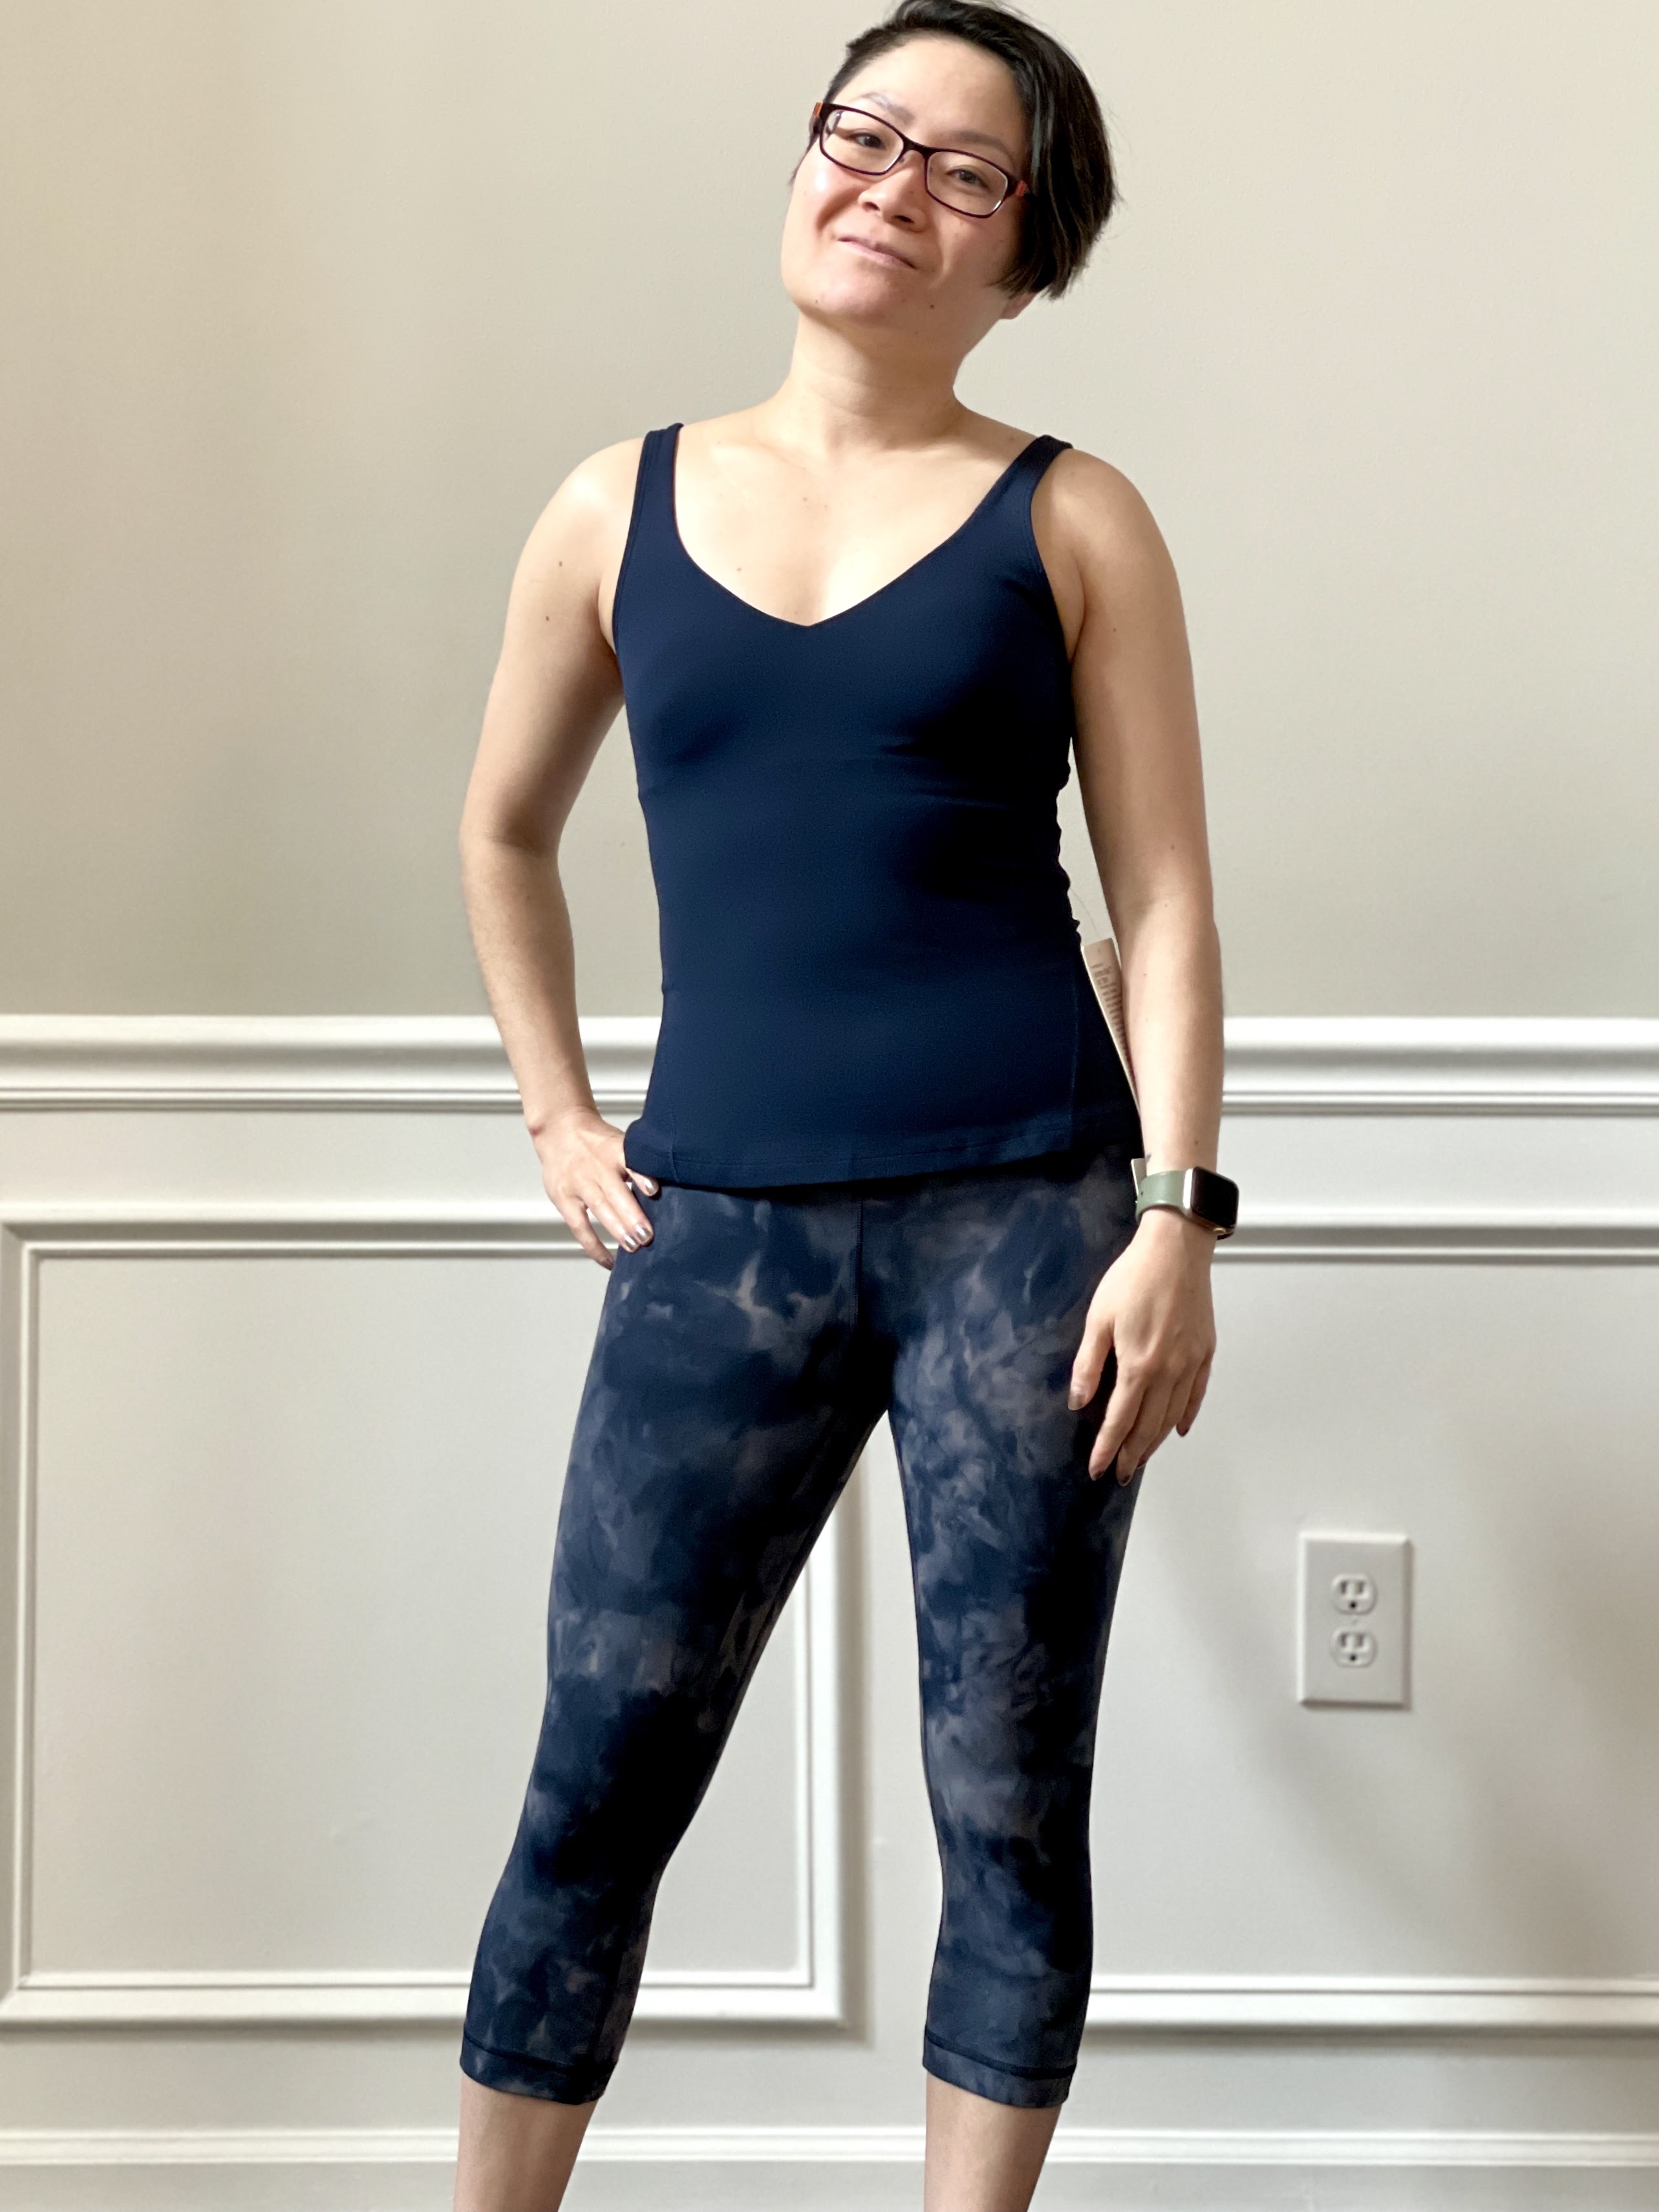 Fit Review! Align Waist Length Tank Top, Align Gathered Front Tank